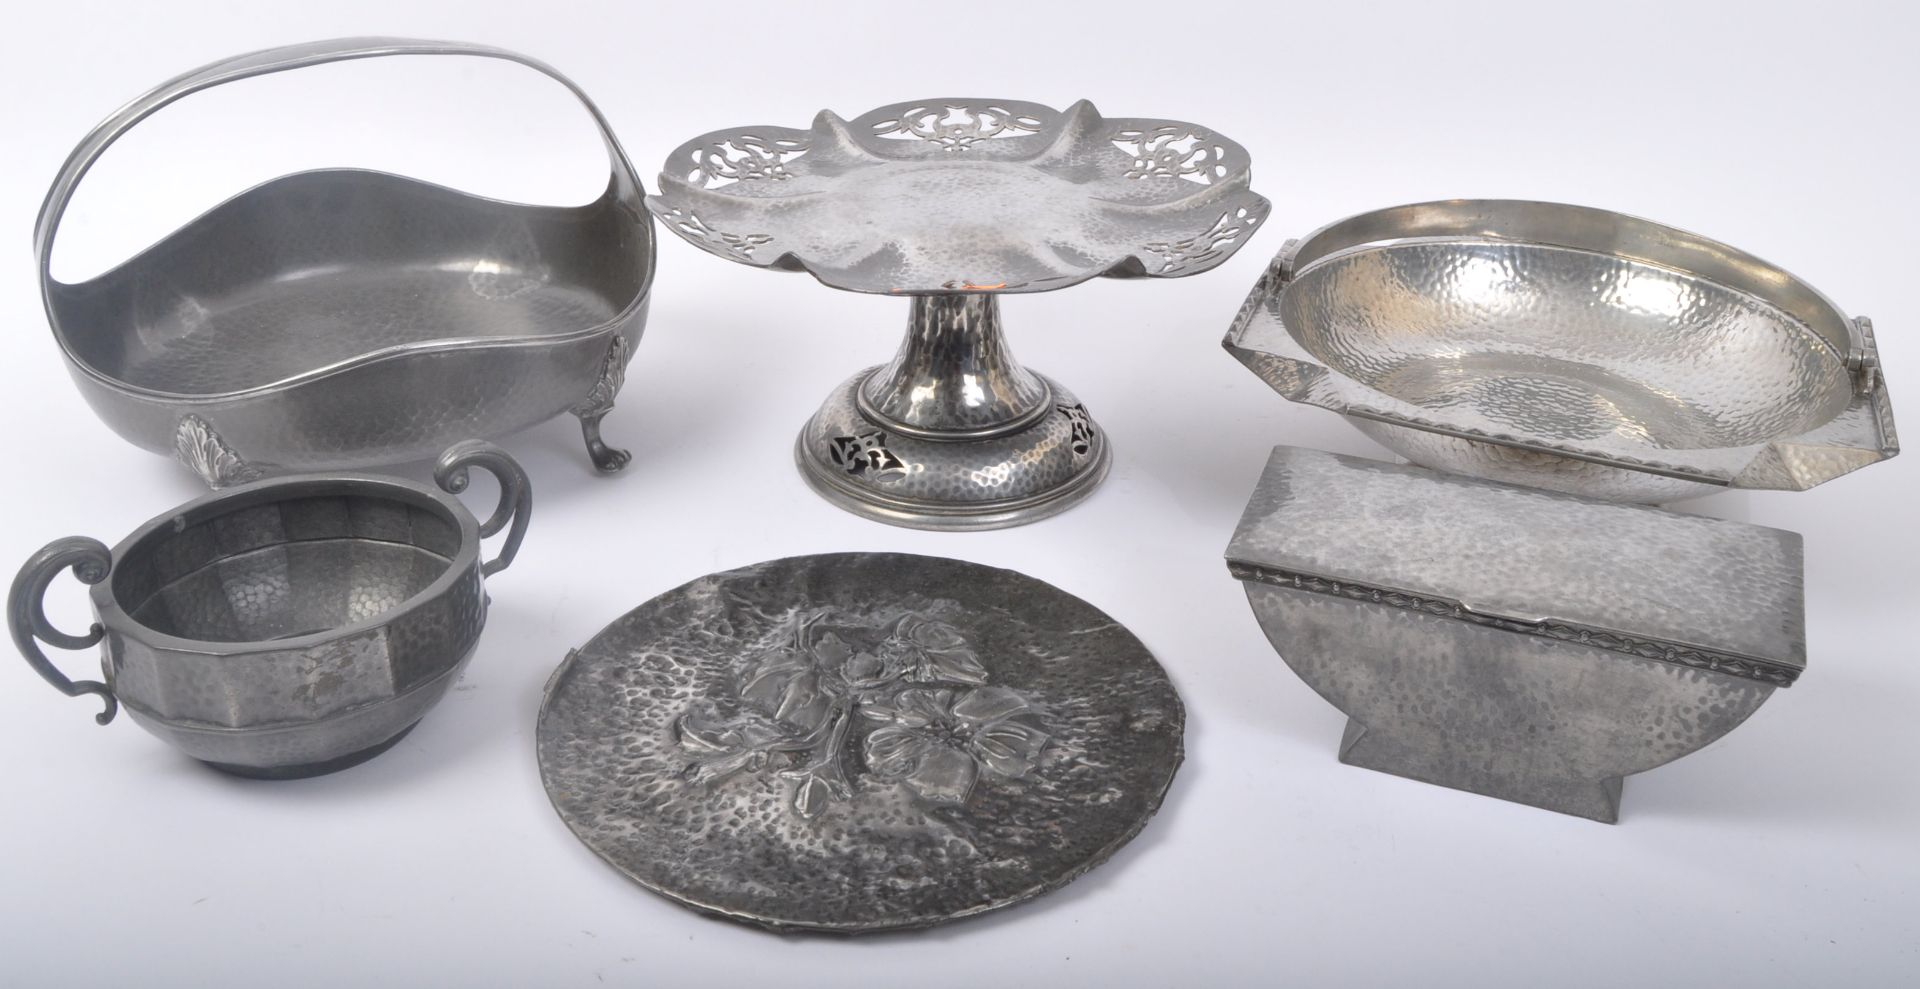 COLLECTION OF 19TH CENTURY & LATER PEWTER